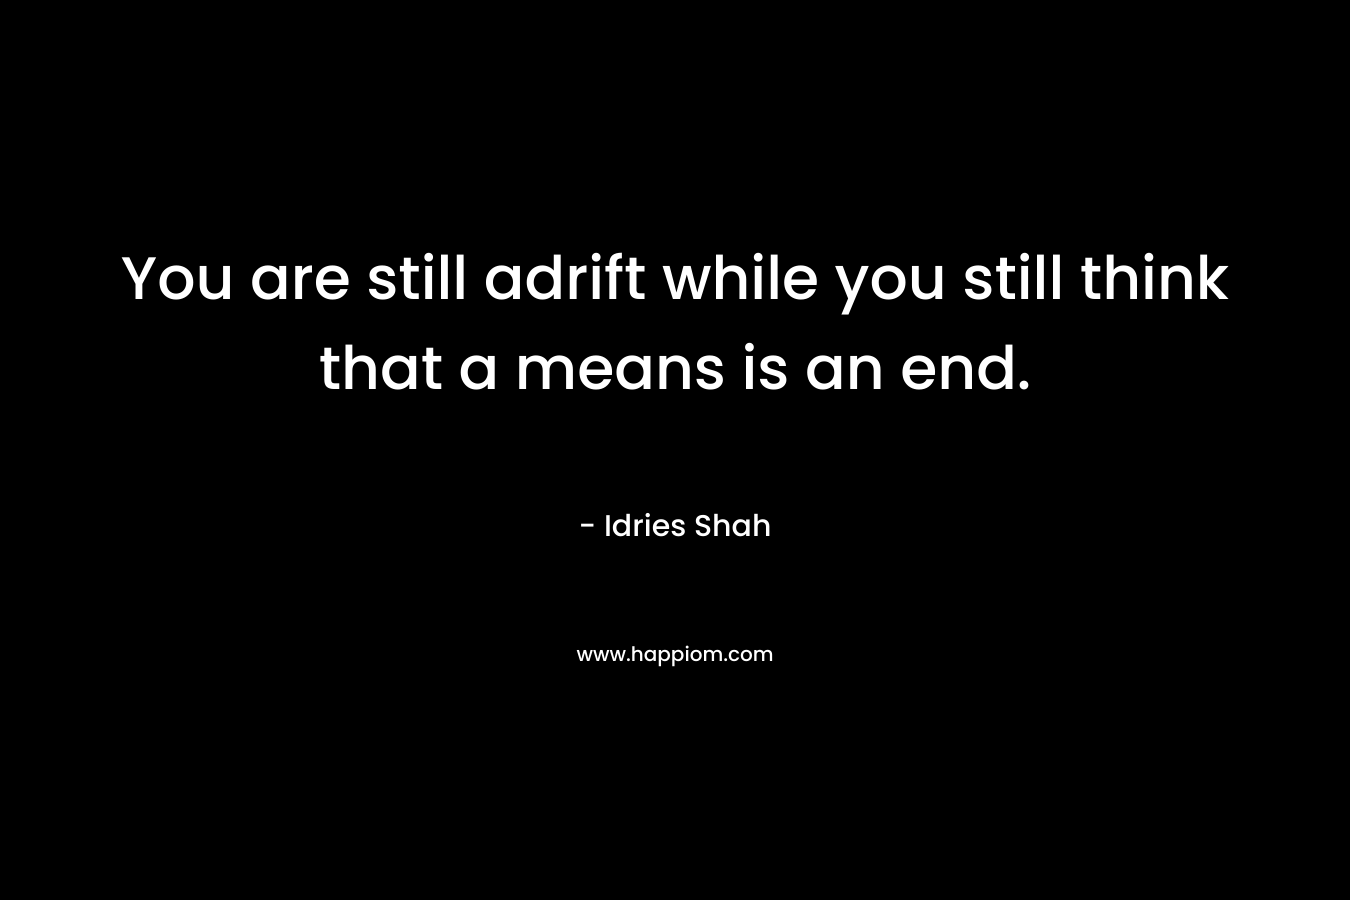 You are still adrift while you still think that a means is an end. – Idries Shah